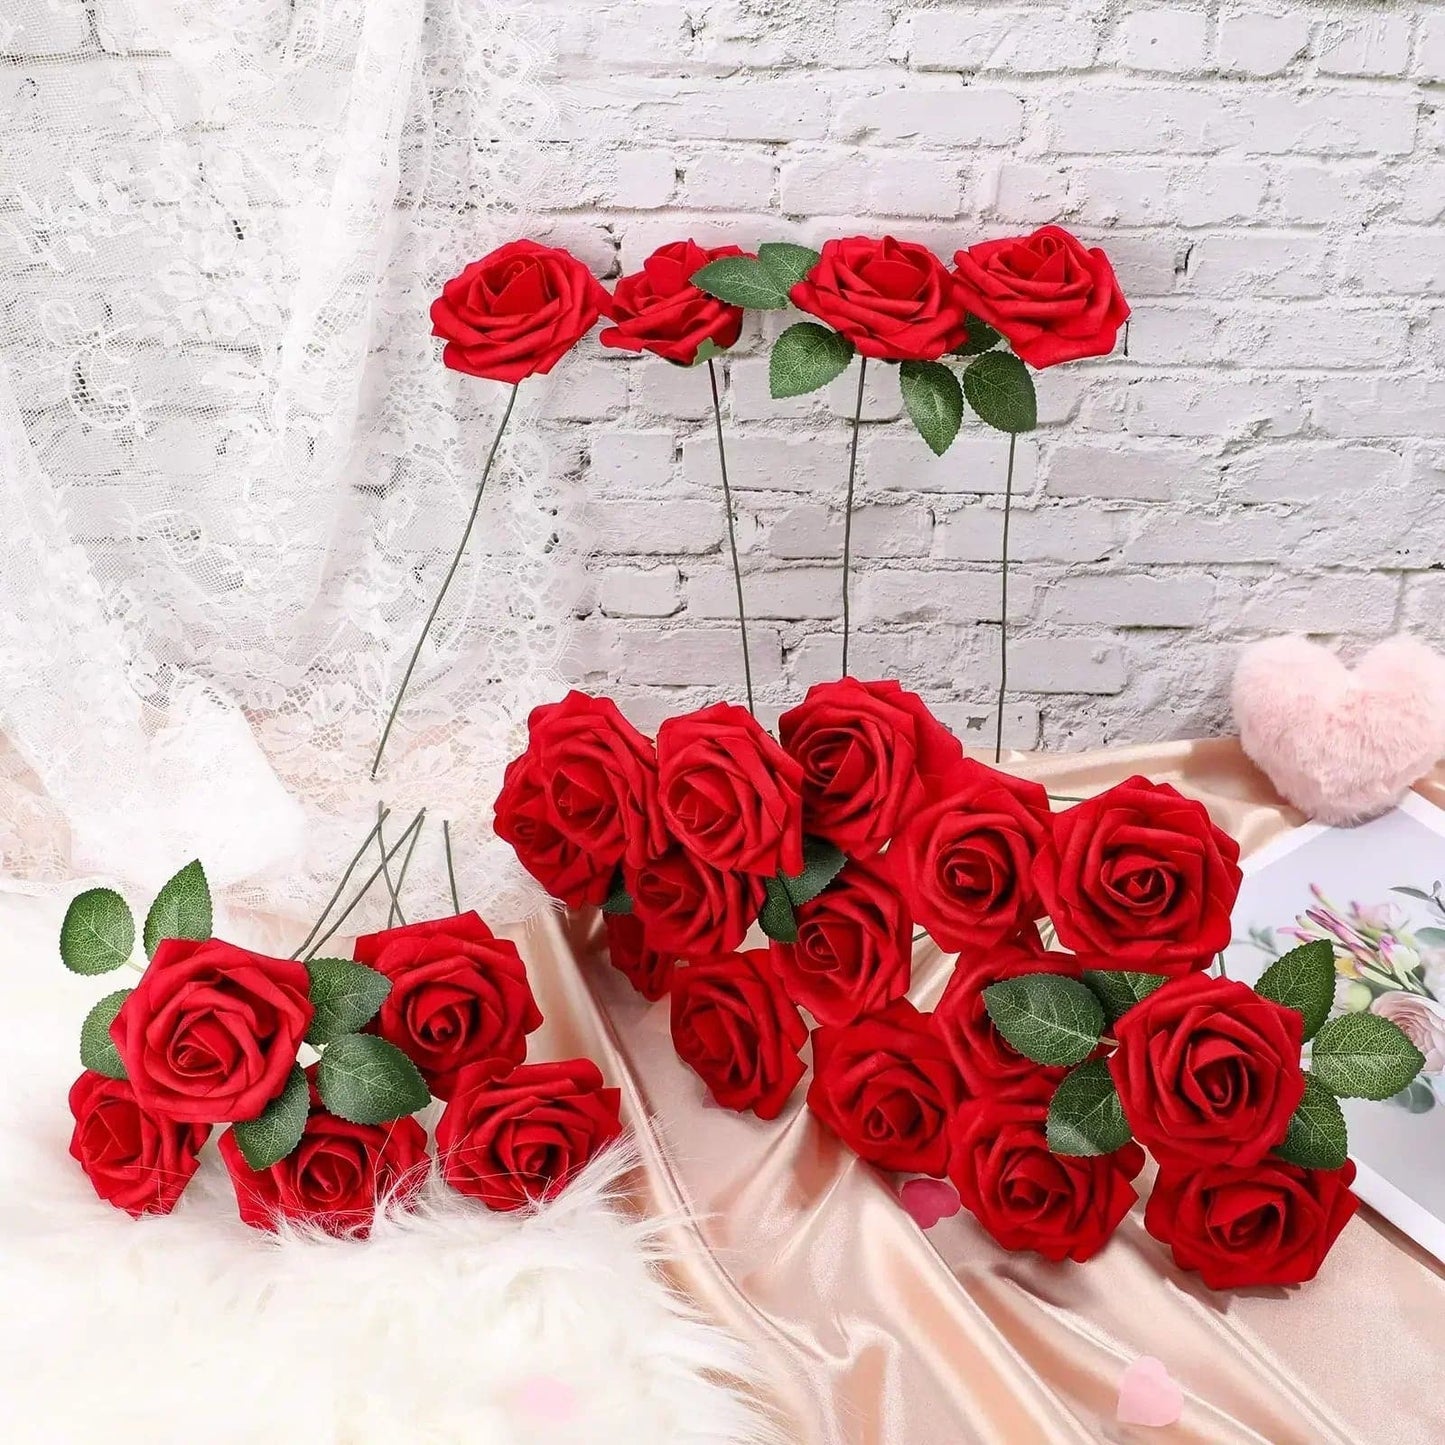 Artificial Roses Flowers Centerpieces - Diy Flower for Valentine